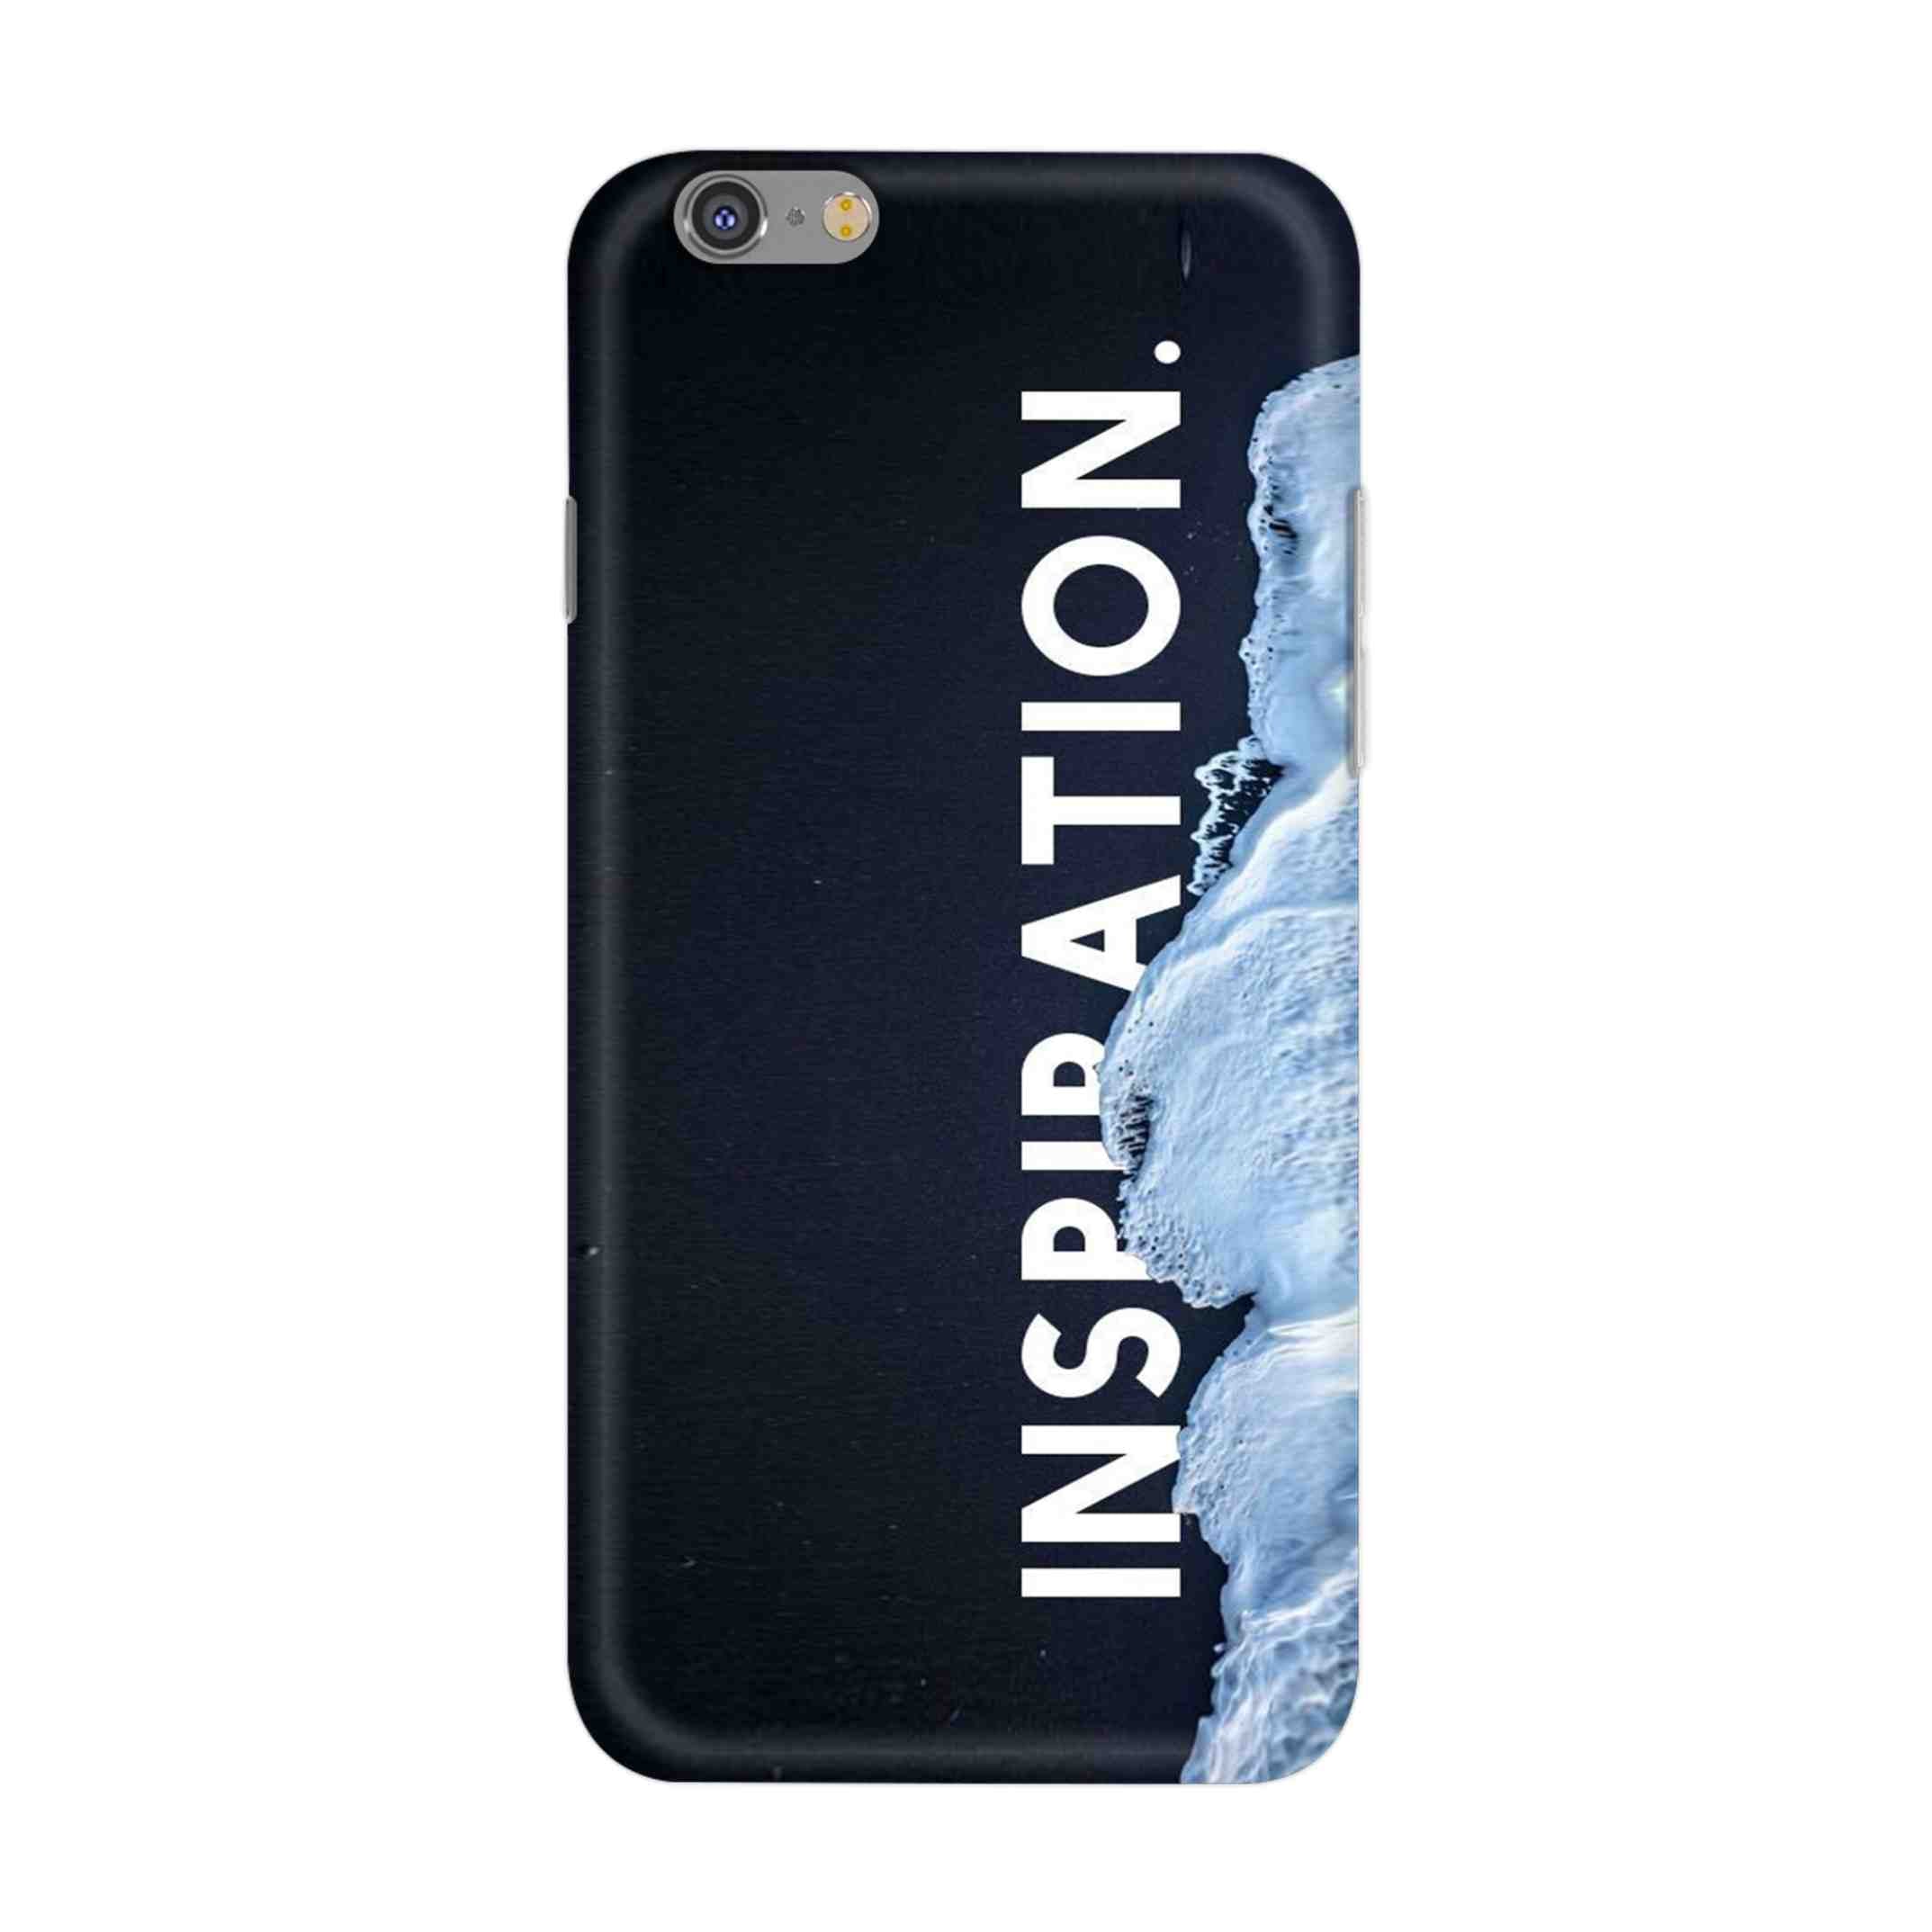 Buy Inspiration Hard Back Mobile Phone Case/Cover For iPhone 6 / 6s Online